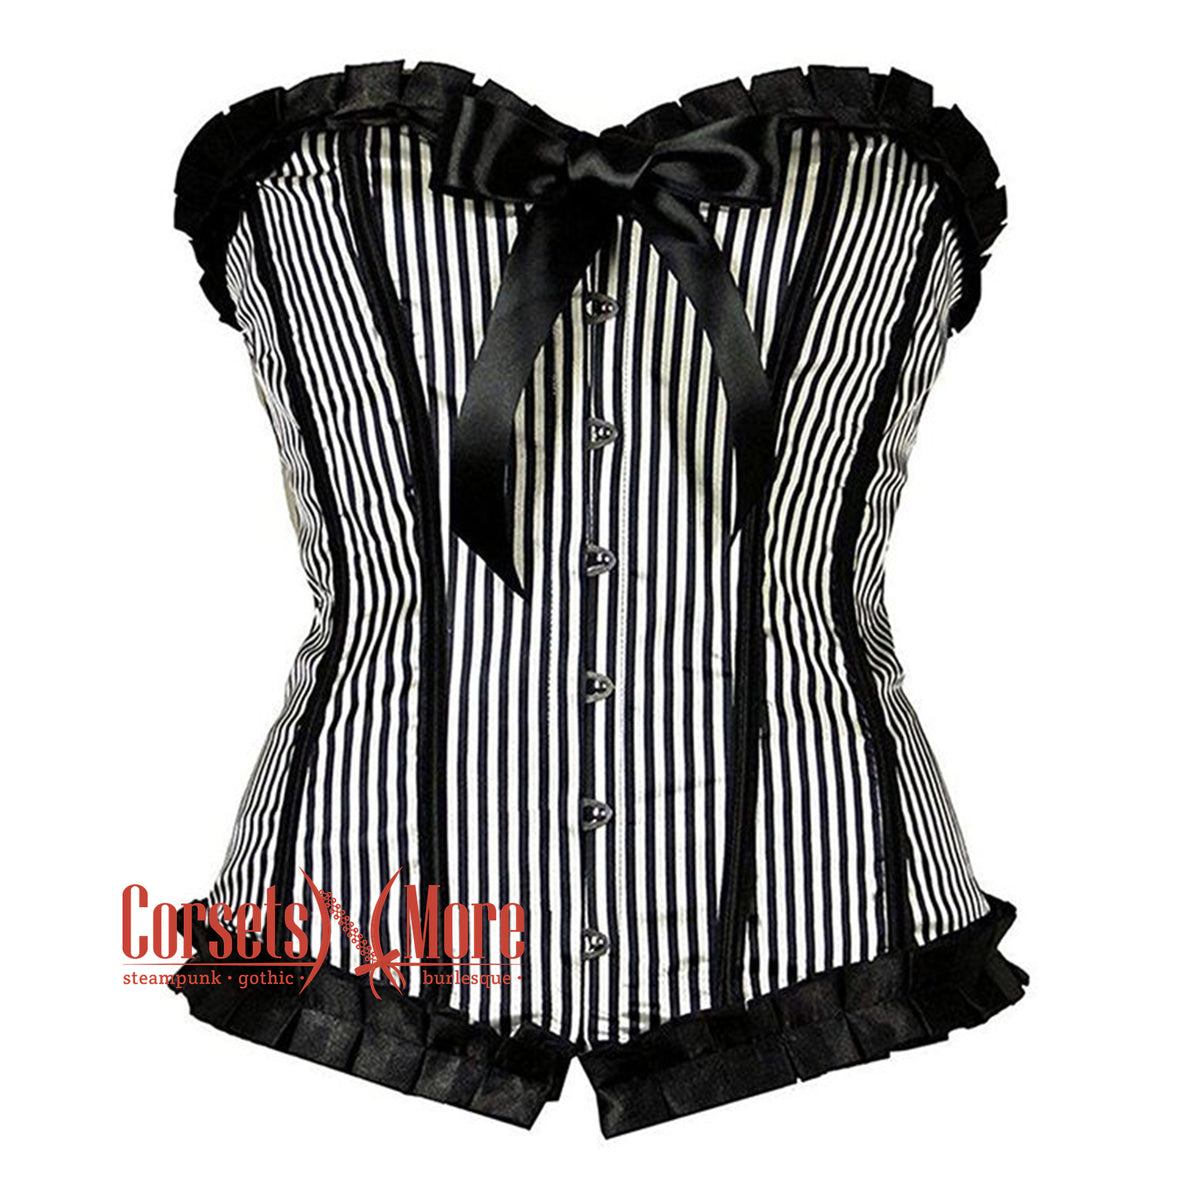 Black And White Cotton Striped Frill Gothic Overbust Corset

– CorsetsNmore